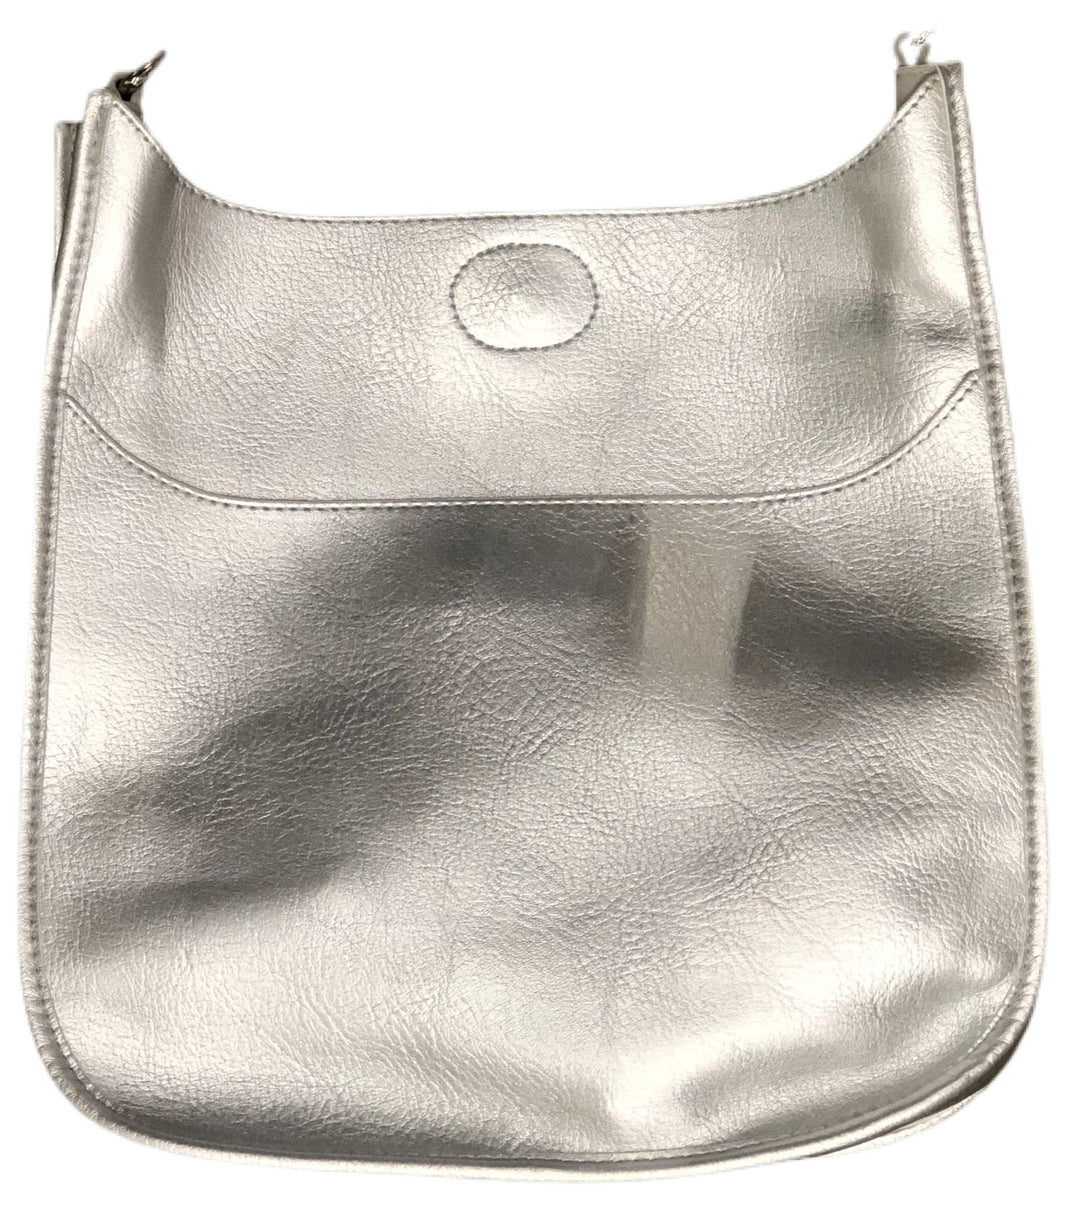 Ahdorned-Vegan Leather Classic Size Bag (No Strap) - Silver w/Silver Hrdwr - Shorely Chic Boutique